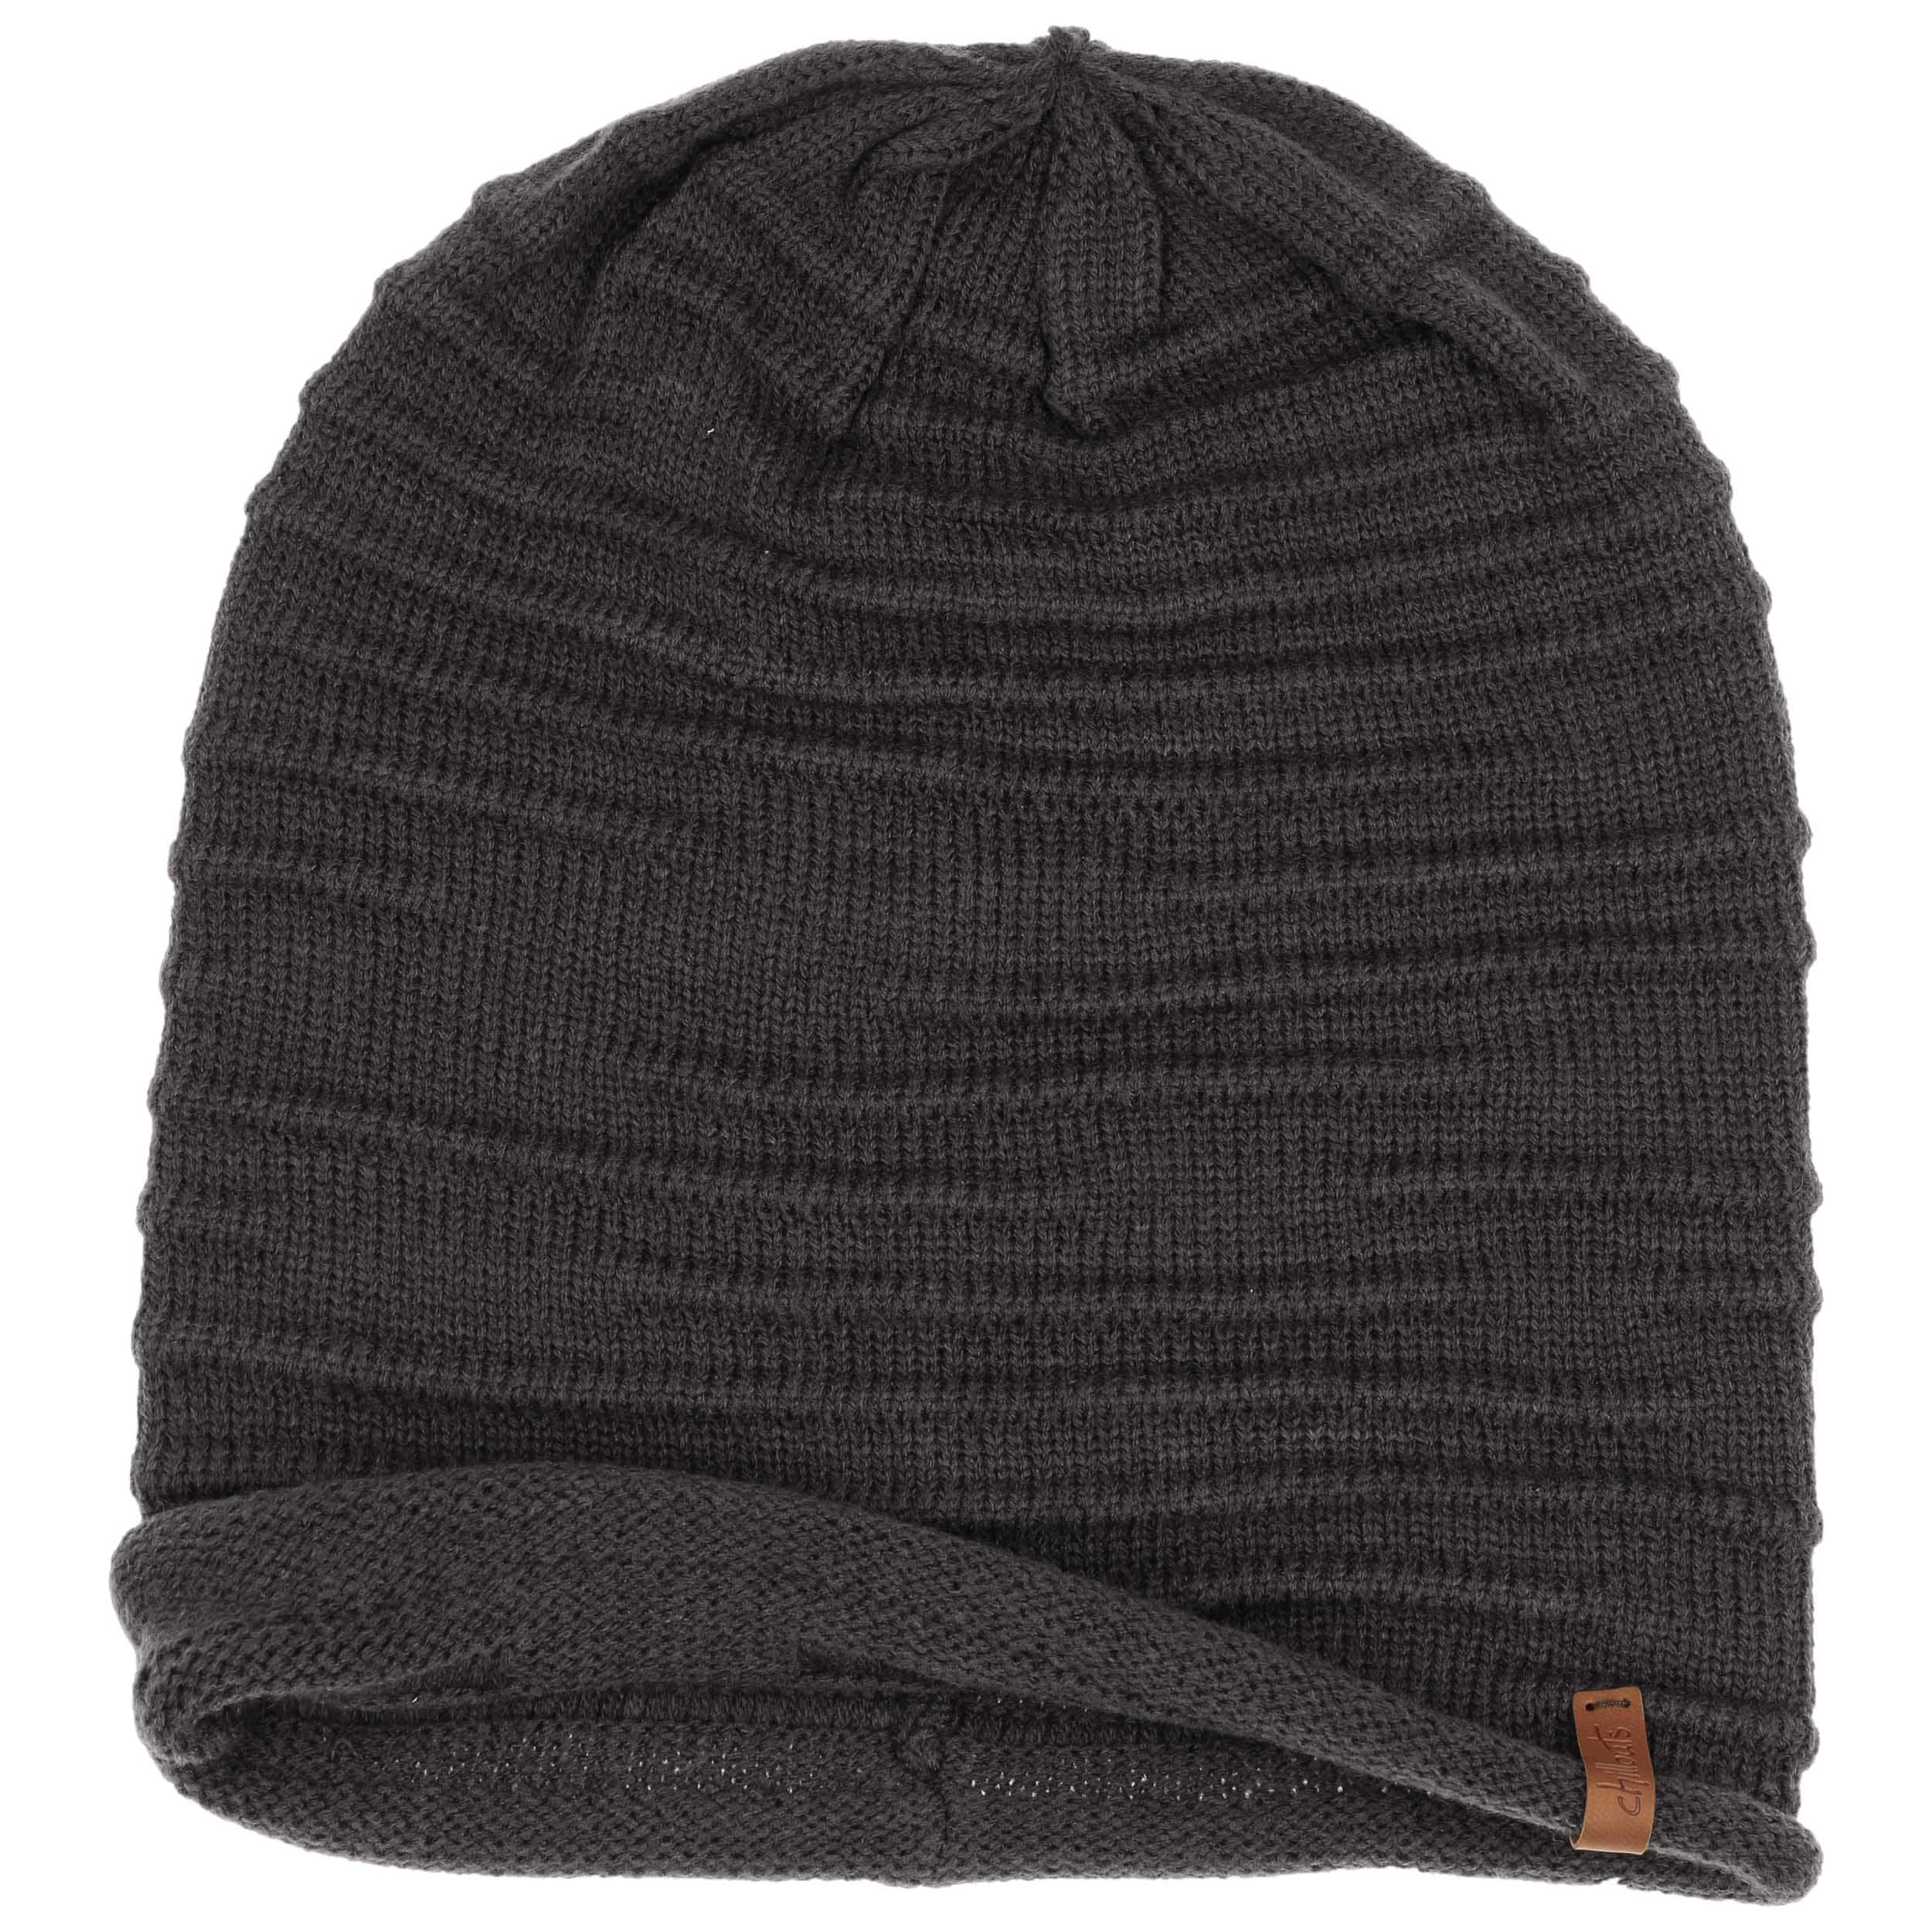 Aarony Long Beanie 19,95 by Strickmütze € - Chillouts